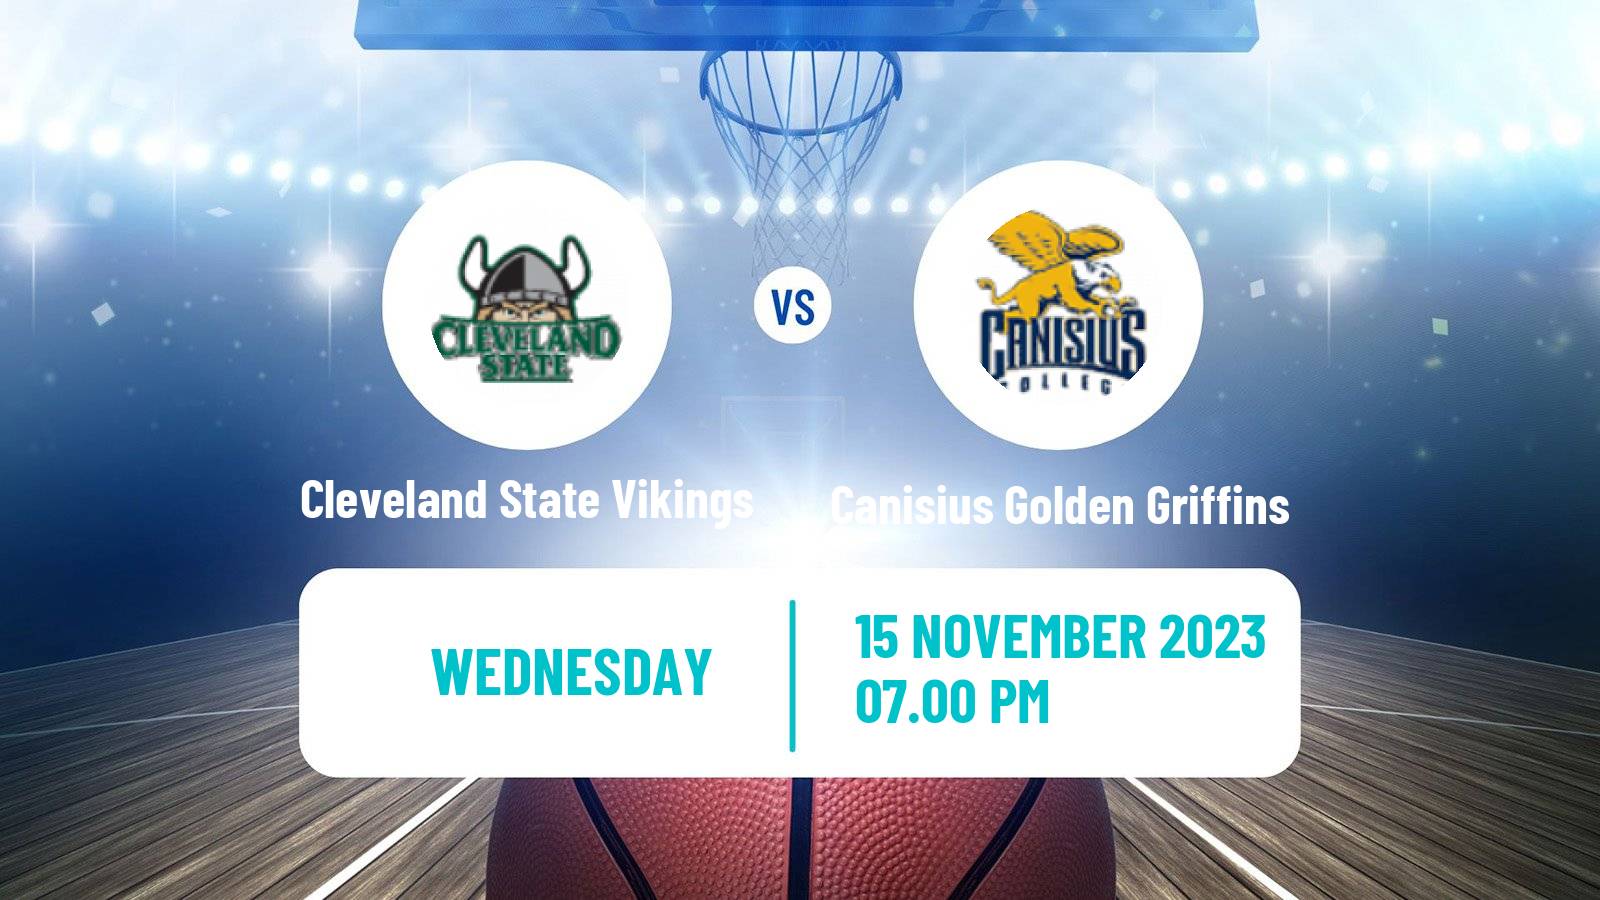 Basketball NCAA College Basketball Cleveland State Vikings - Canisius Golden Griffins